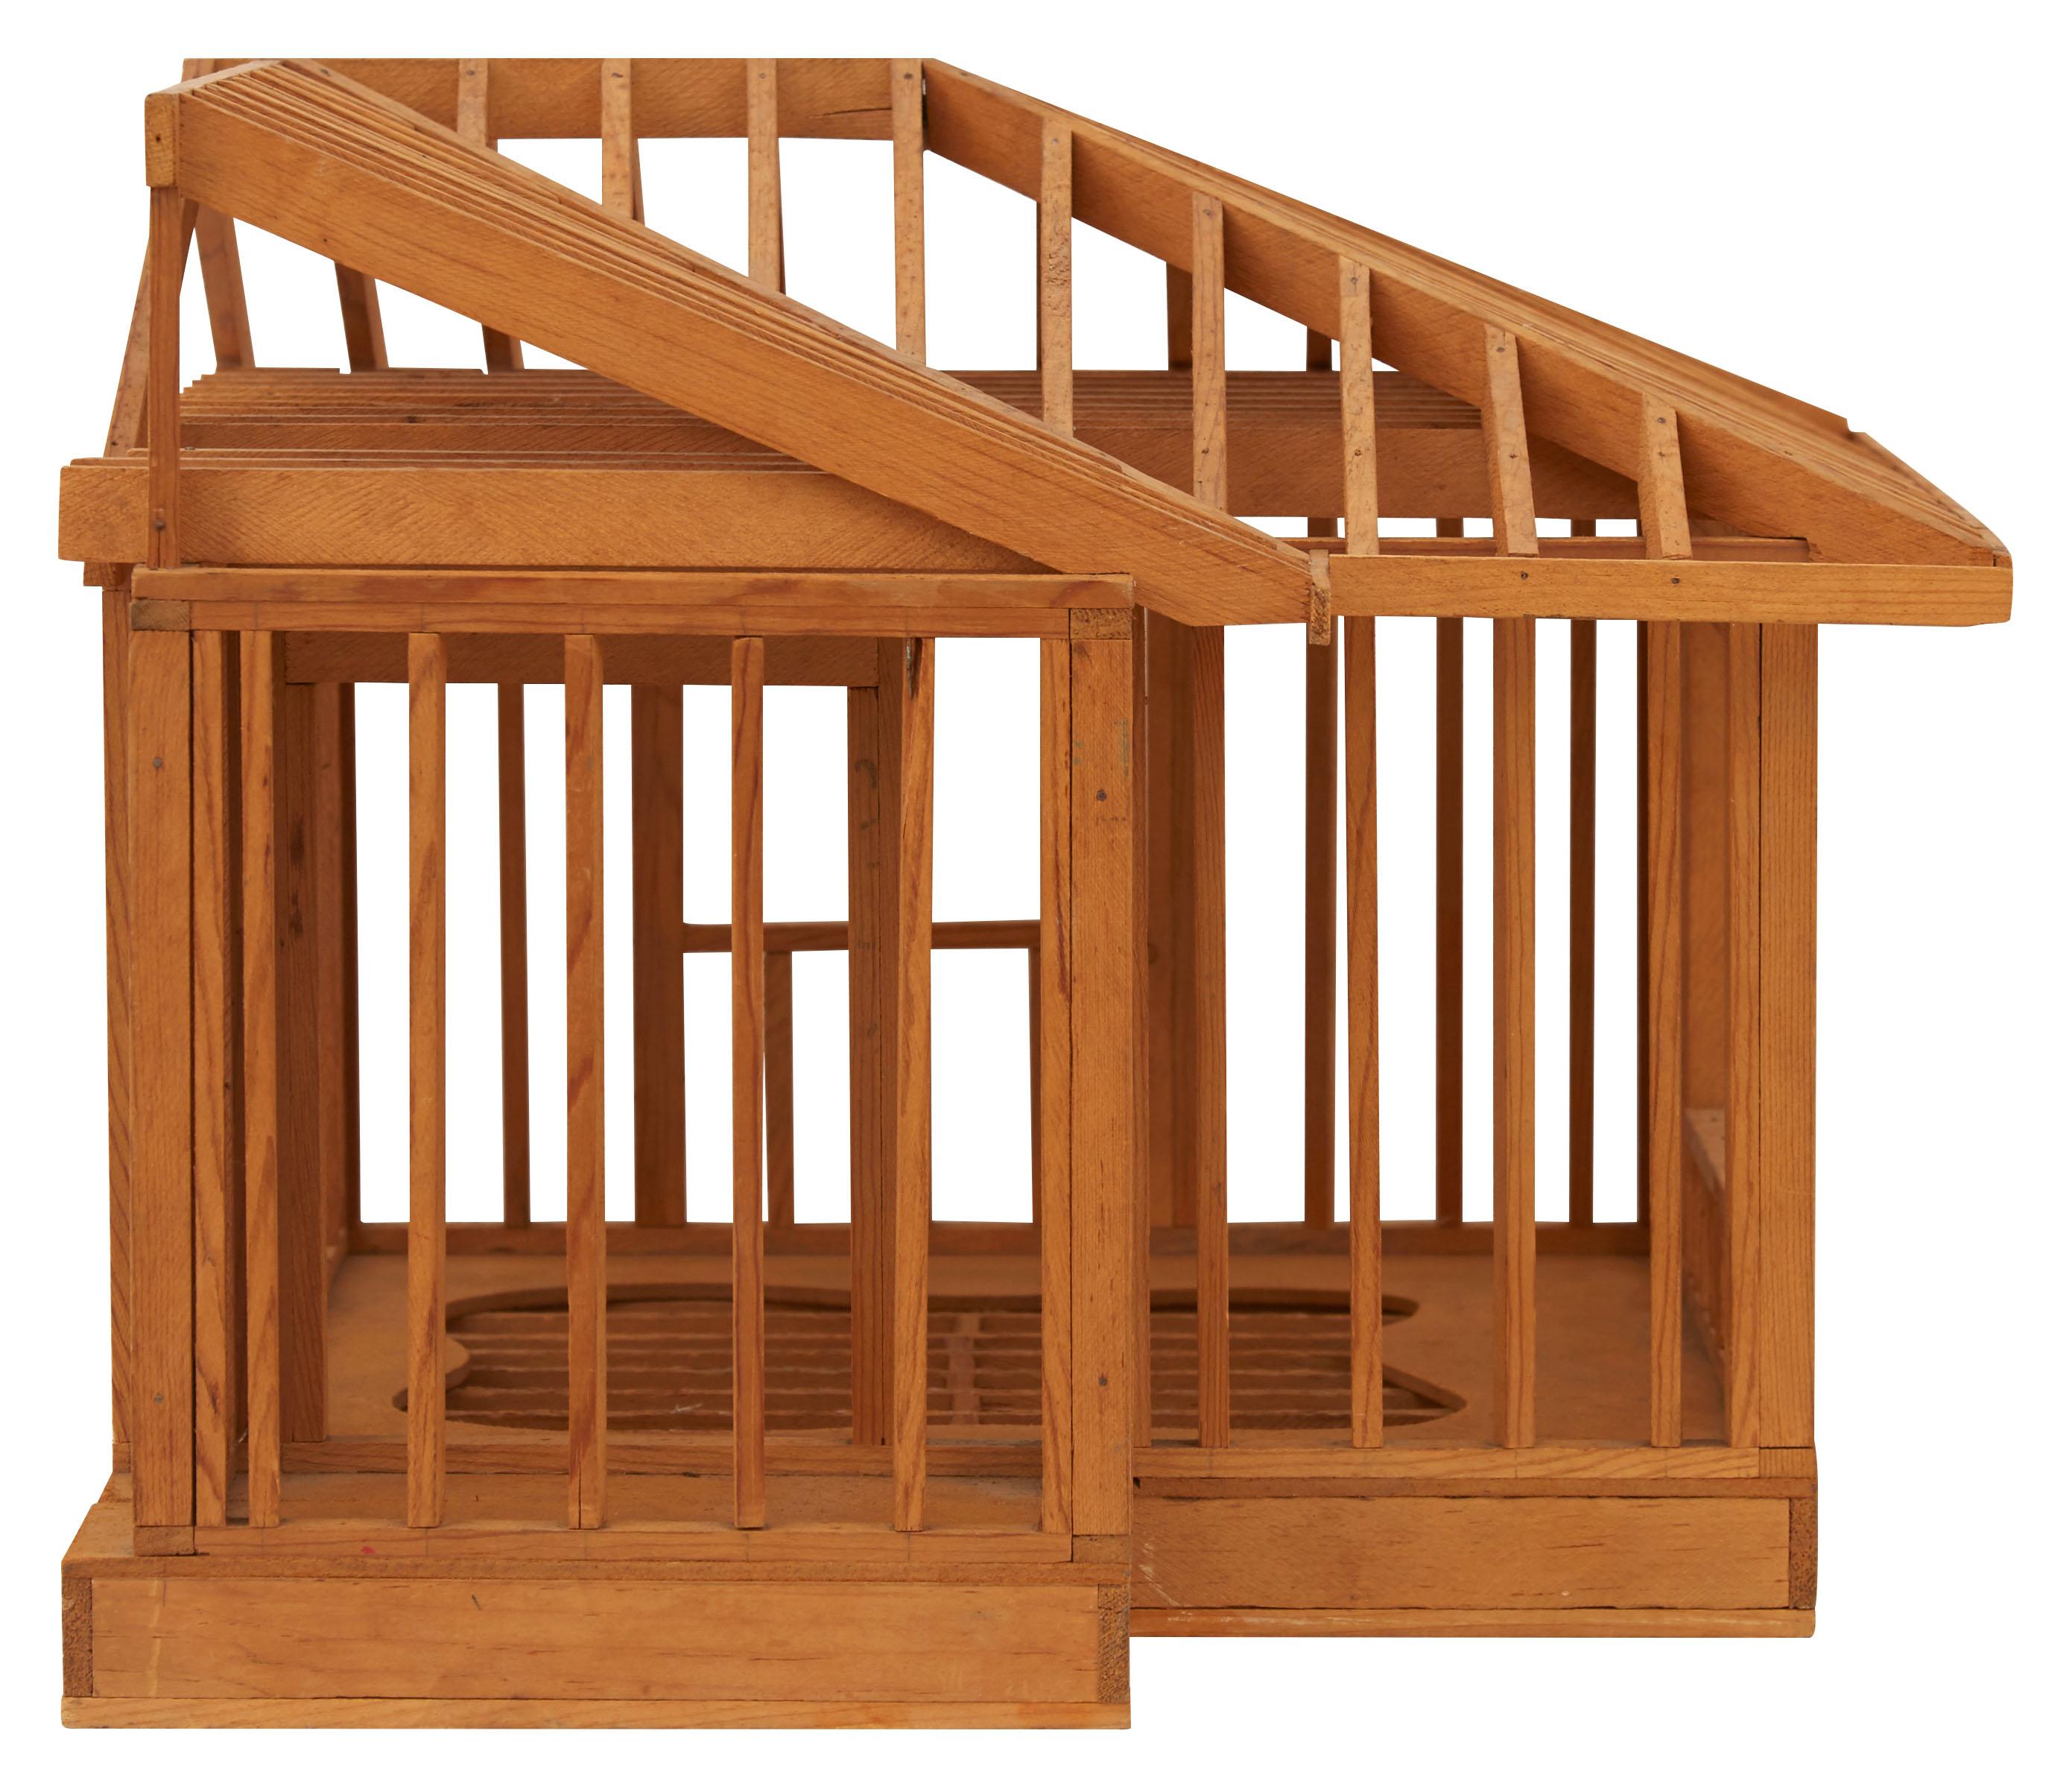 20th Century Wooden House Architectural Model